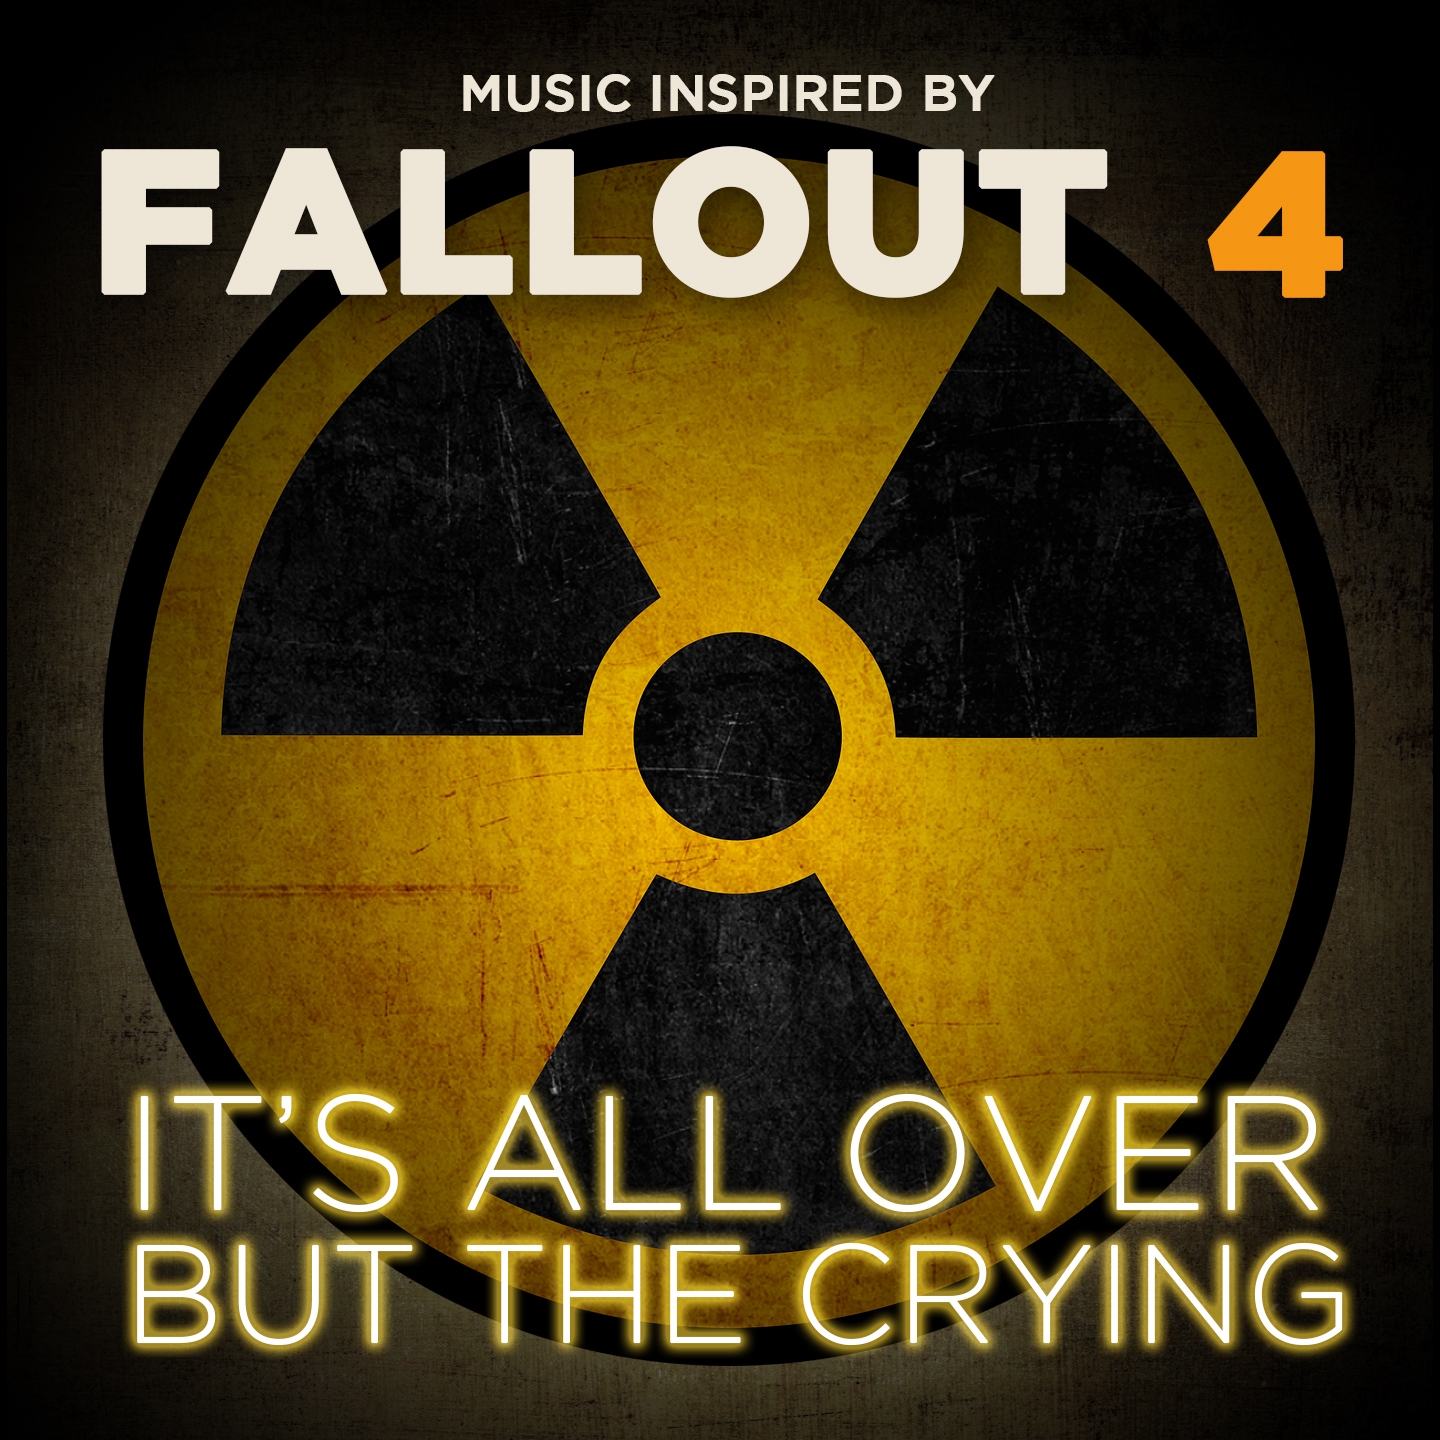 It's All over but the Crying (Music Inspired by Fallout 4)